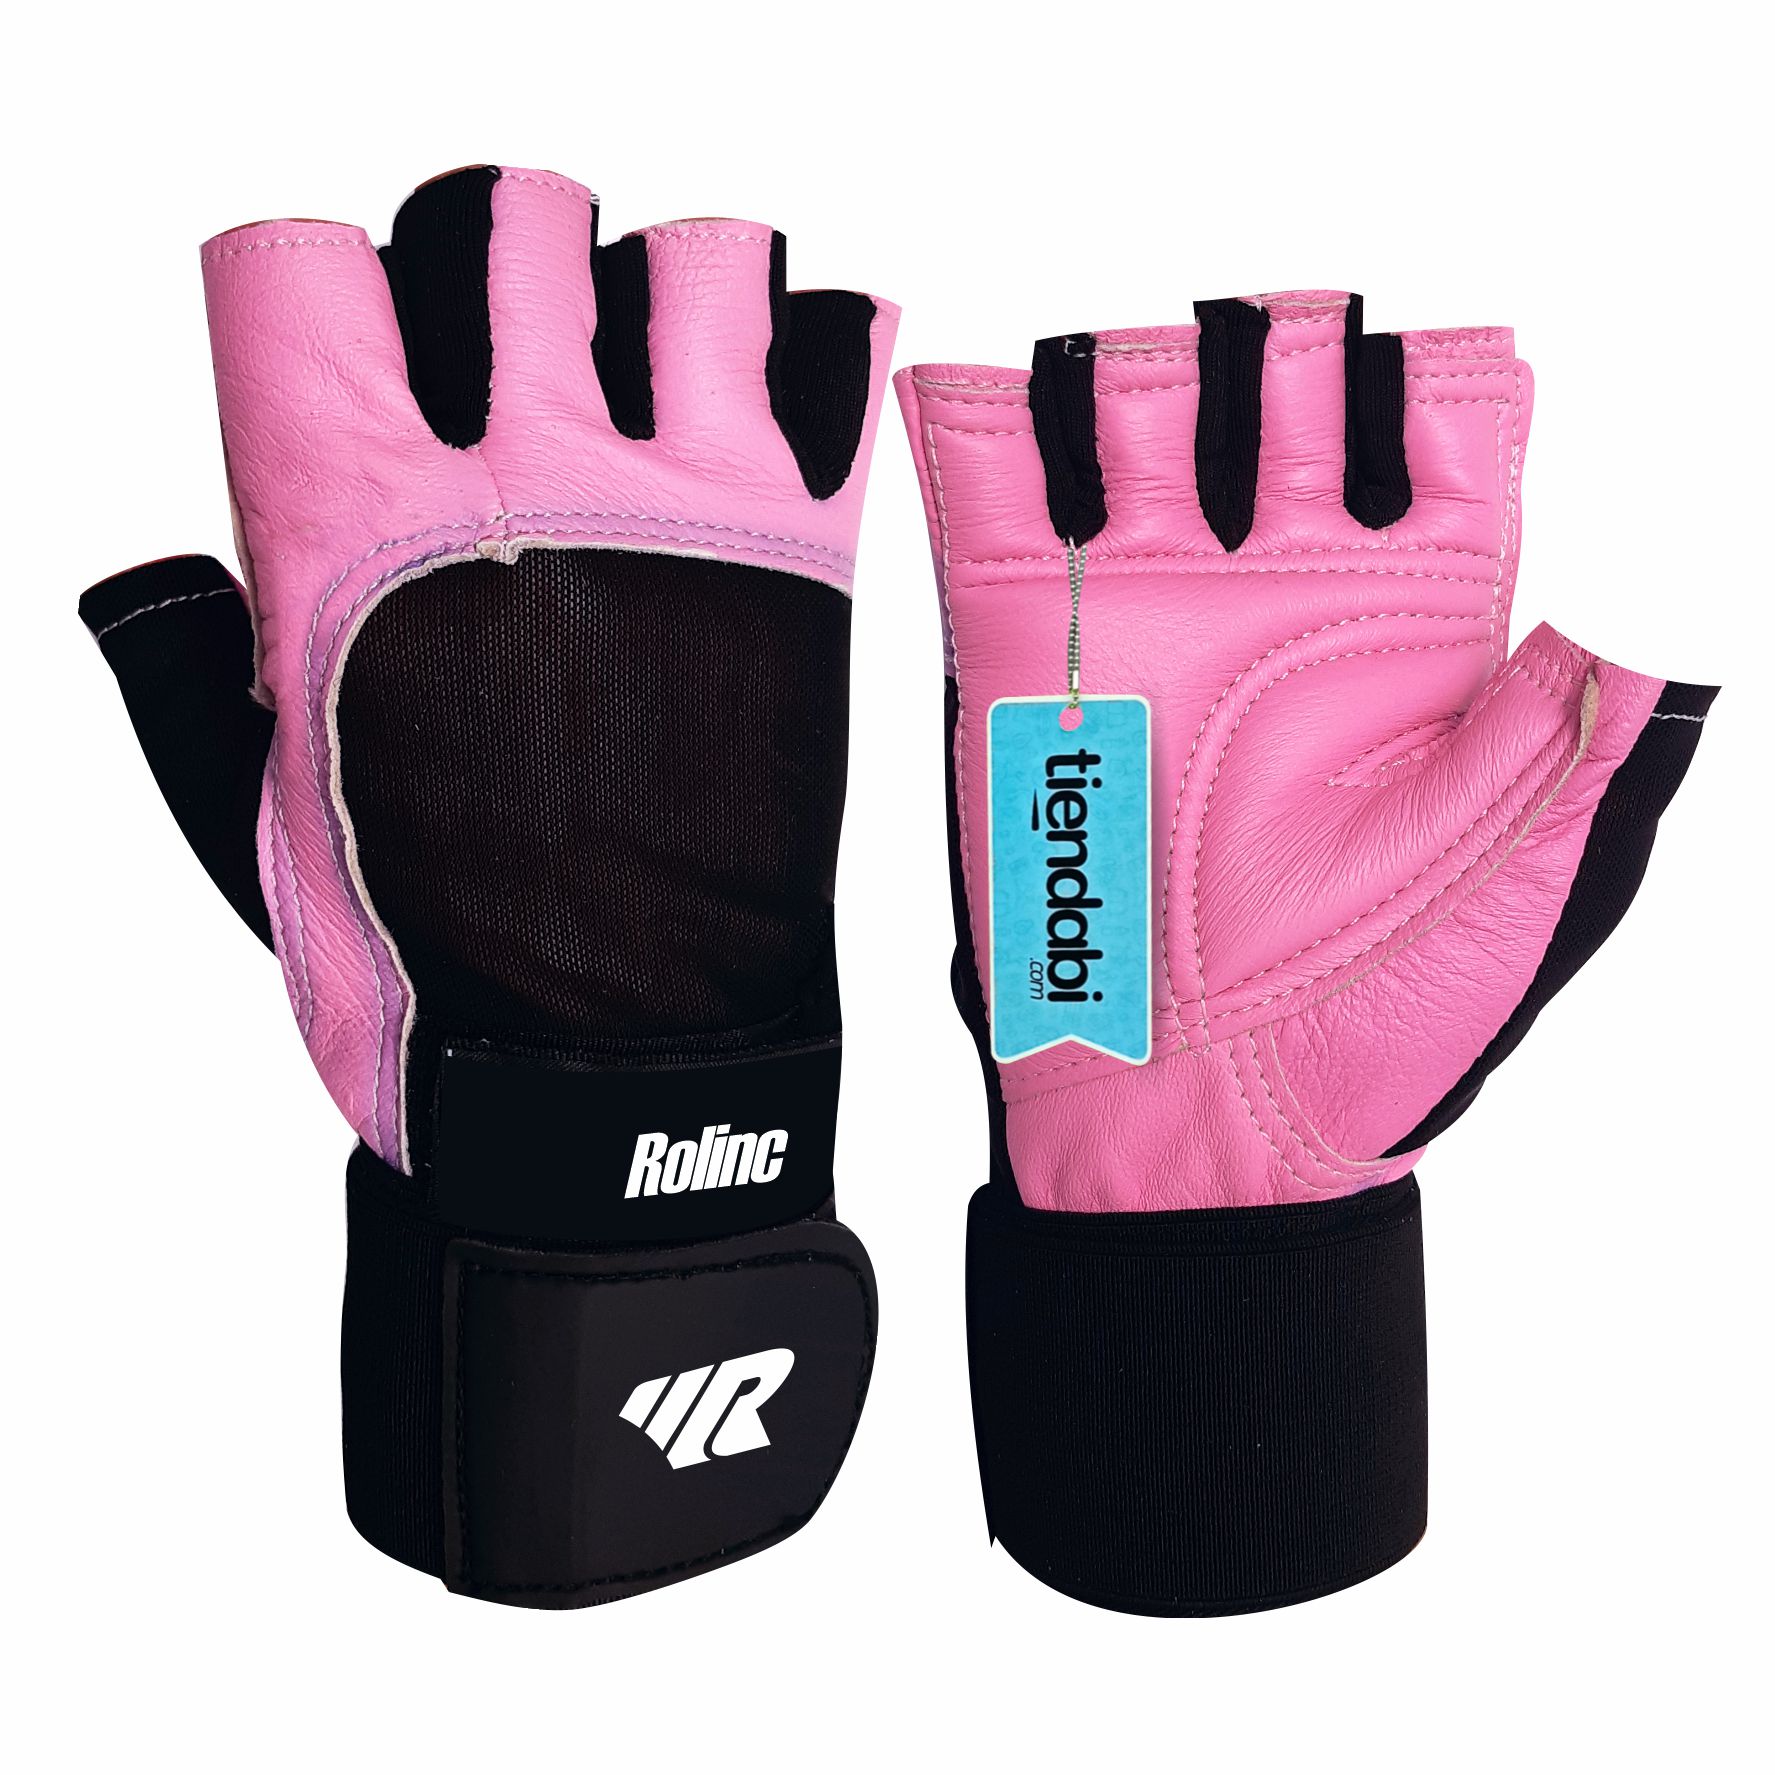 Ripley - GUANTES GYM MUJER TMT W47 TRANSPIRABLES